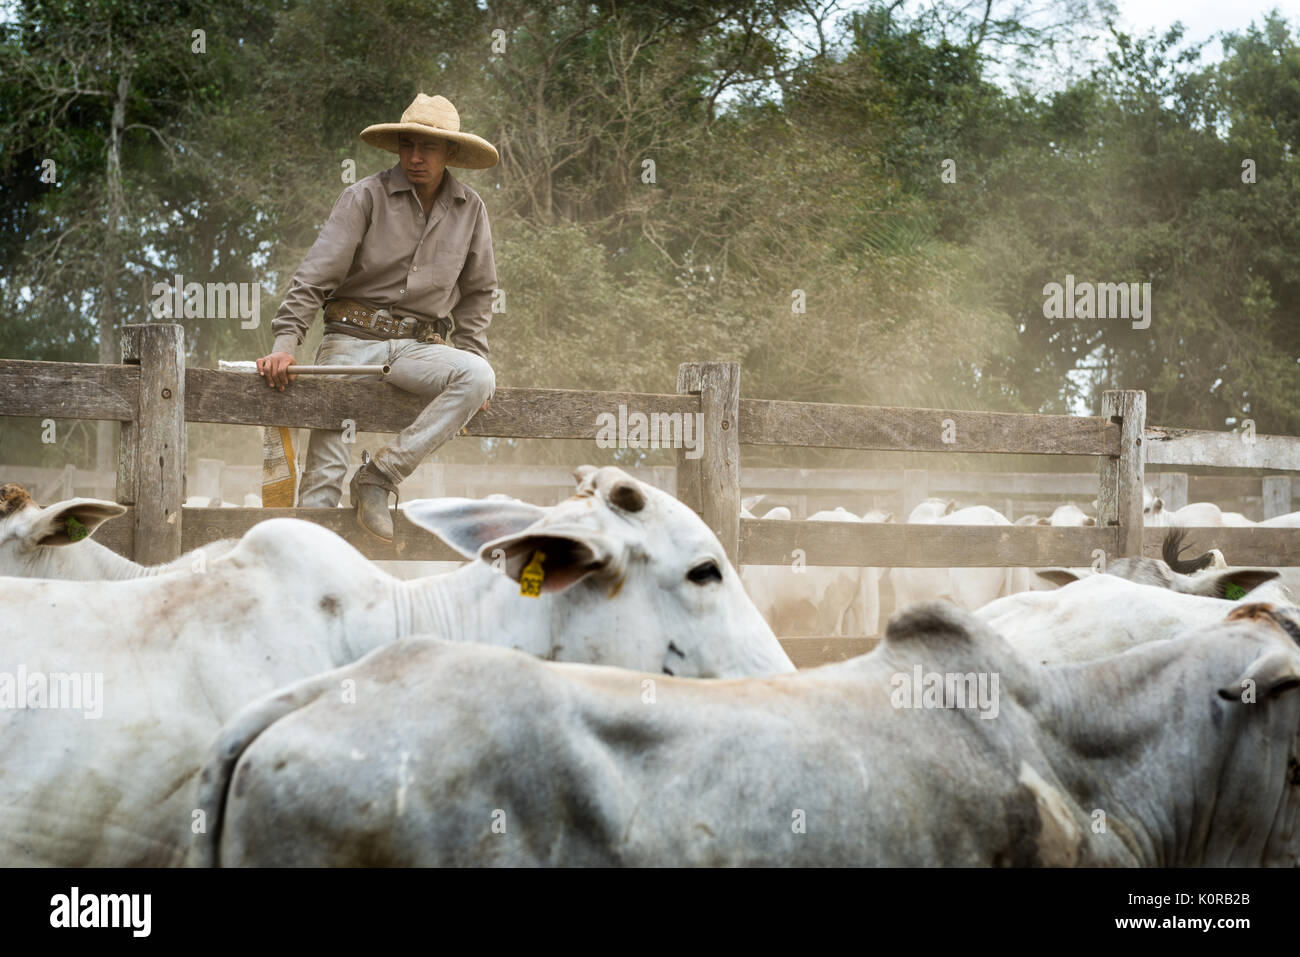 Cowboy corraling the cattle in the Pantanal Stock Photo